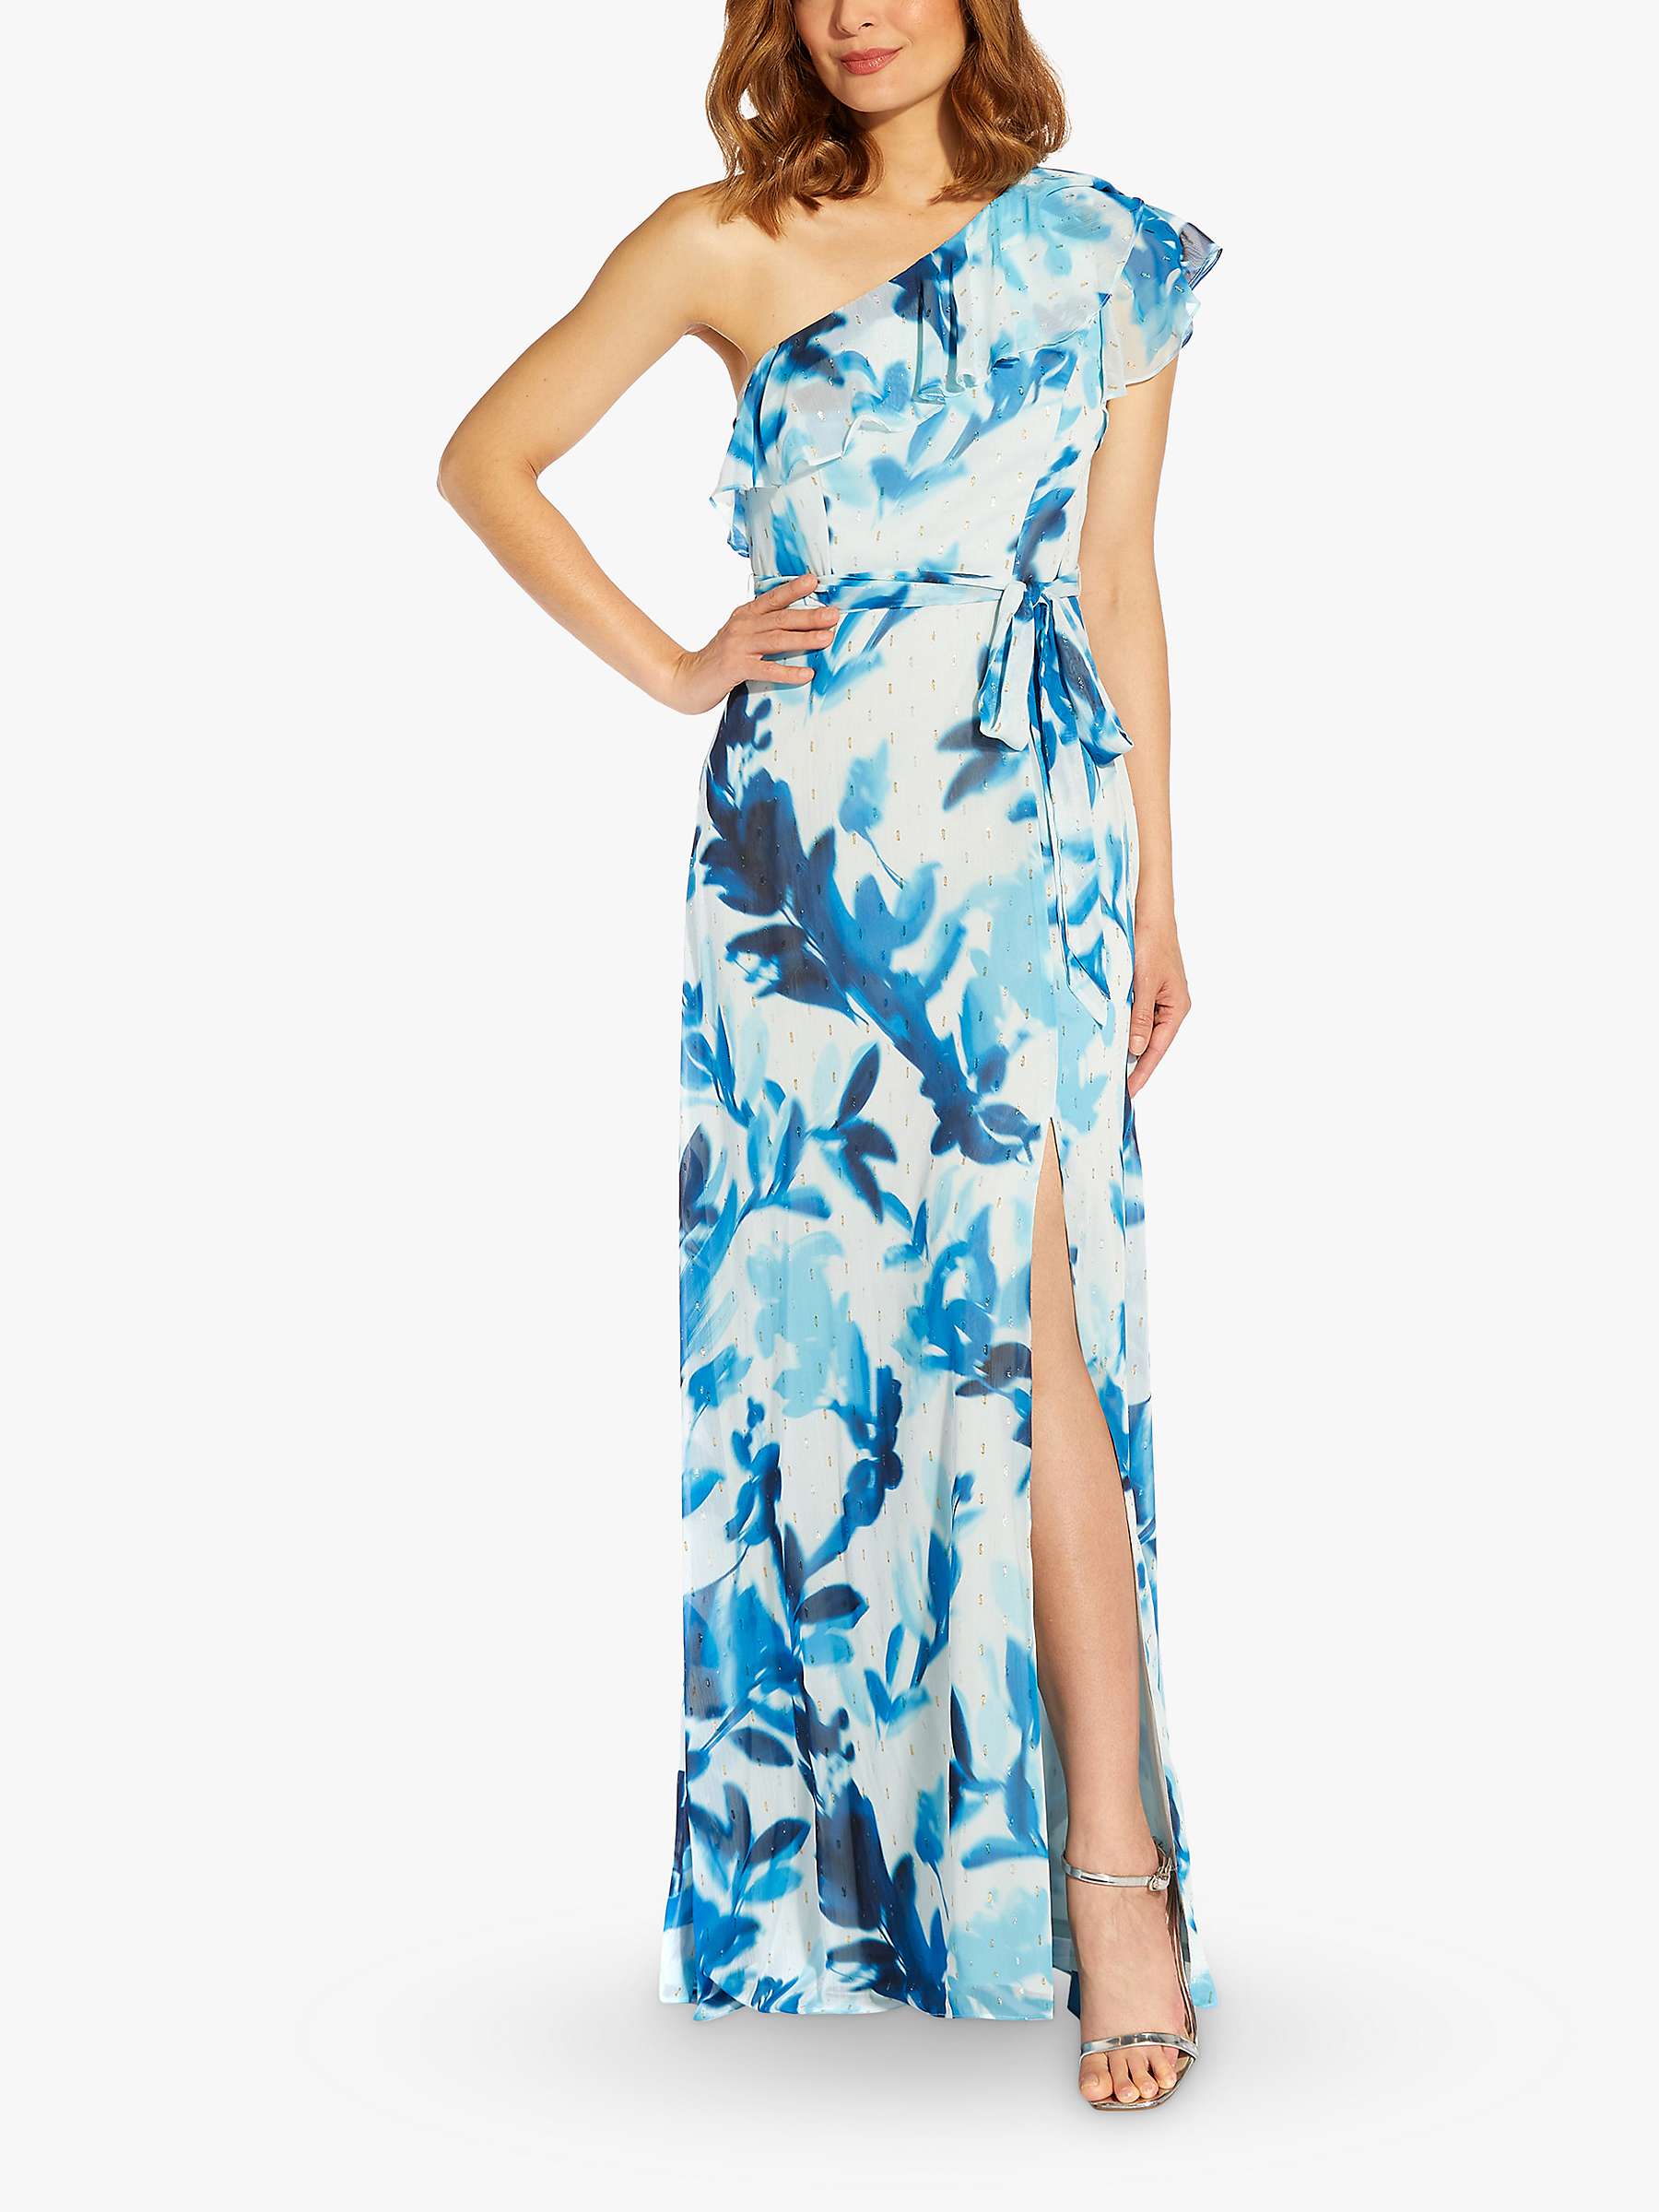 Buy Adrianna Papell Floral Metallic Maxi Dress, Blue/Multi Online at johnlewis.com